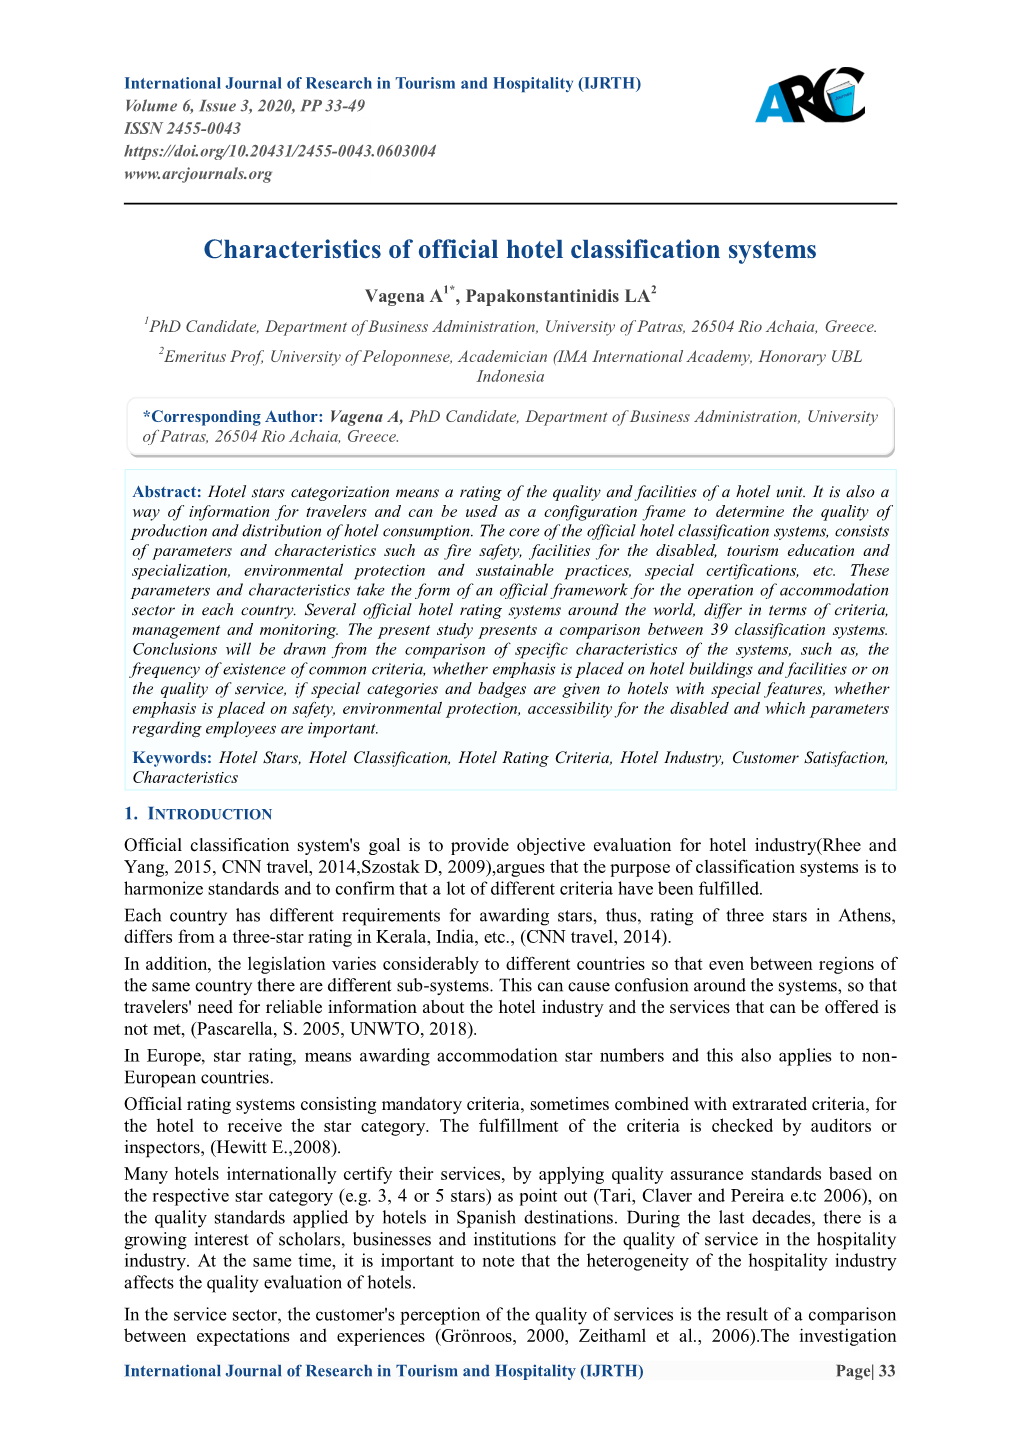 Characteristics of Official Hotel Classification Systems